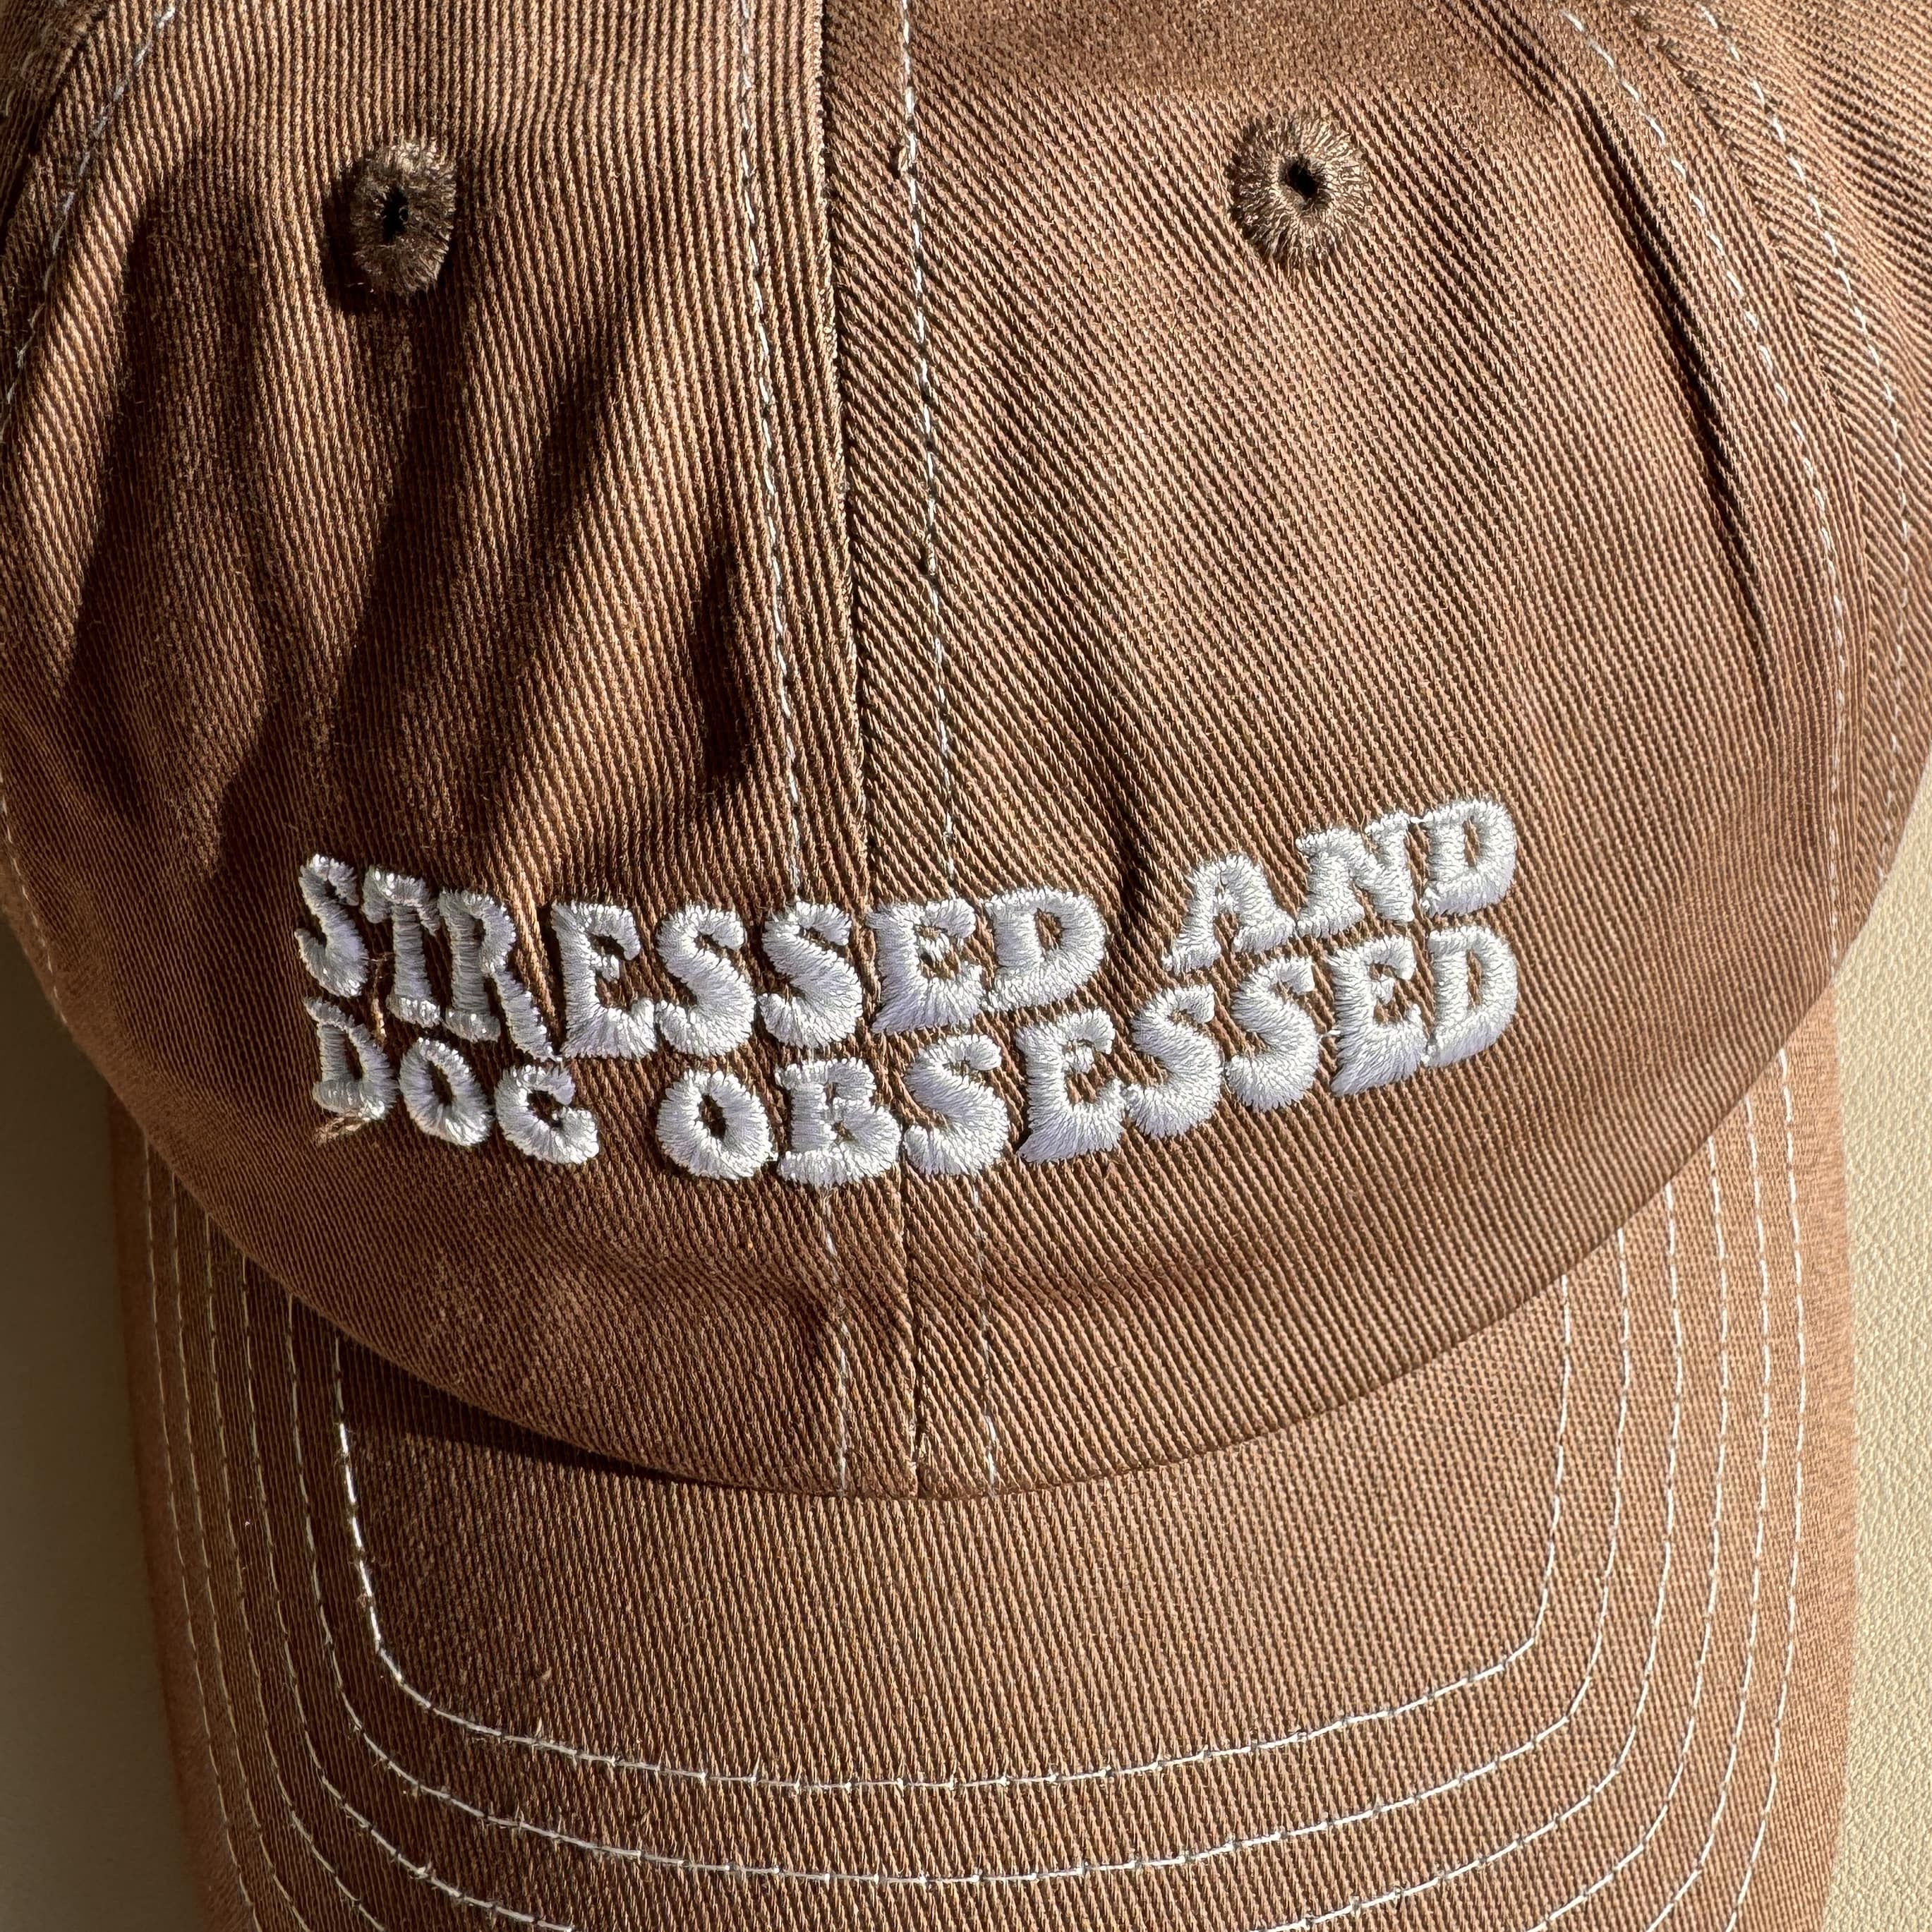 Dad Hat - Stressed & Dog Obsessed